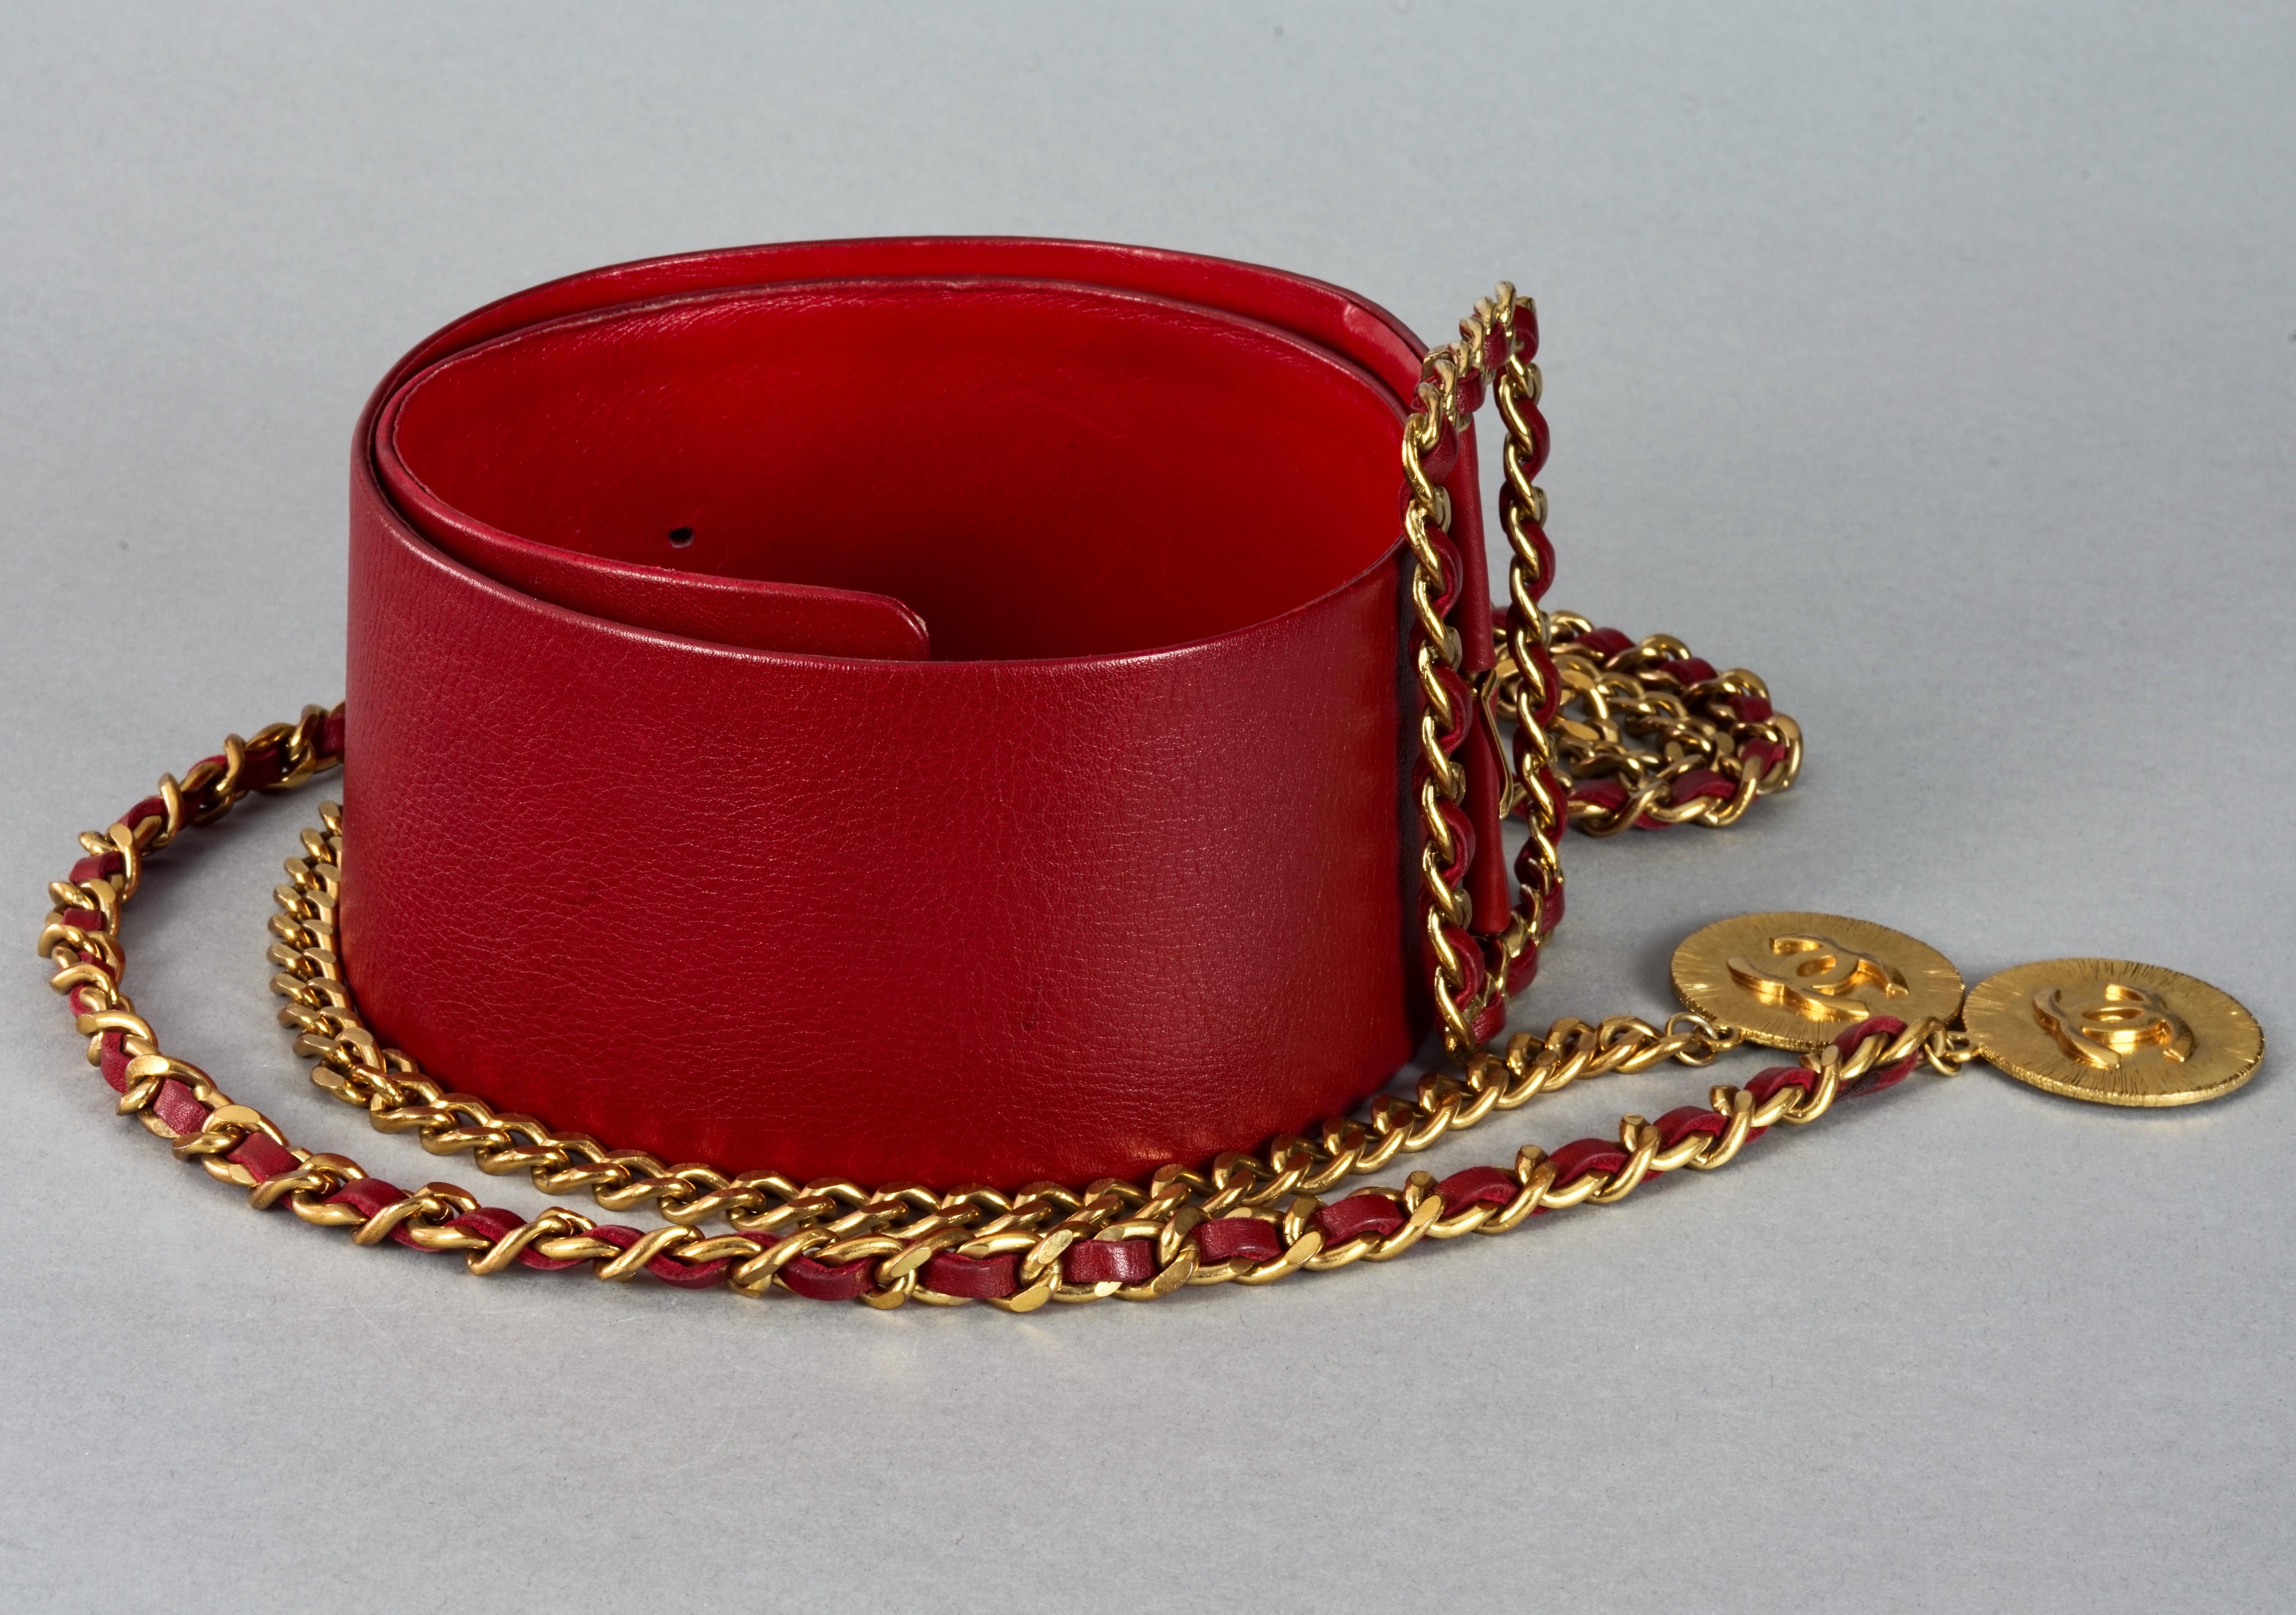 Vintage CHANEL Claudia Schiffer Wide Long Chain Medallion Red Leather Belt In Good Condition For Sale In Kingersheim, Alsace